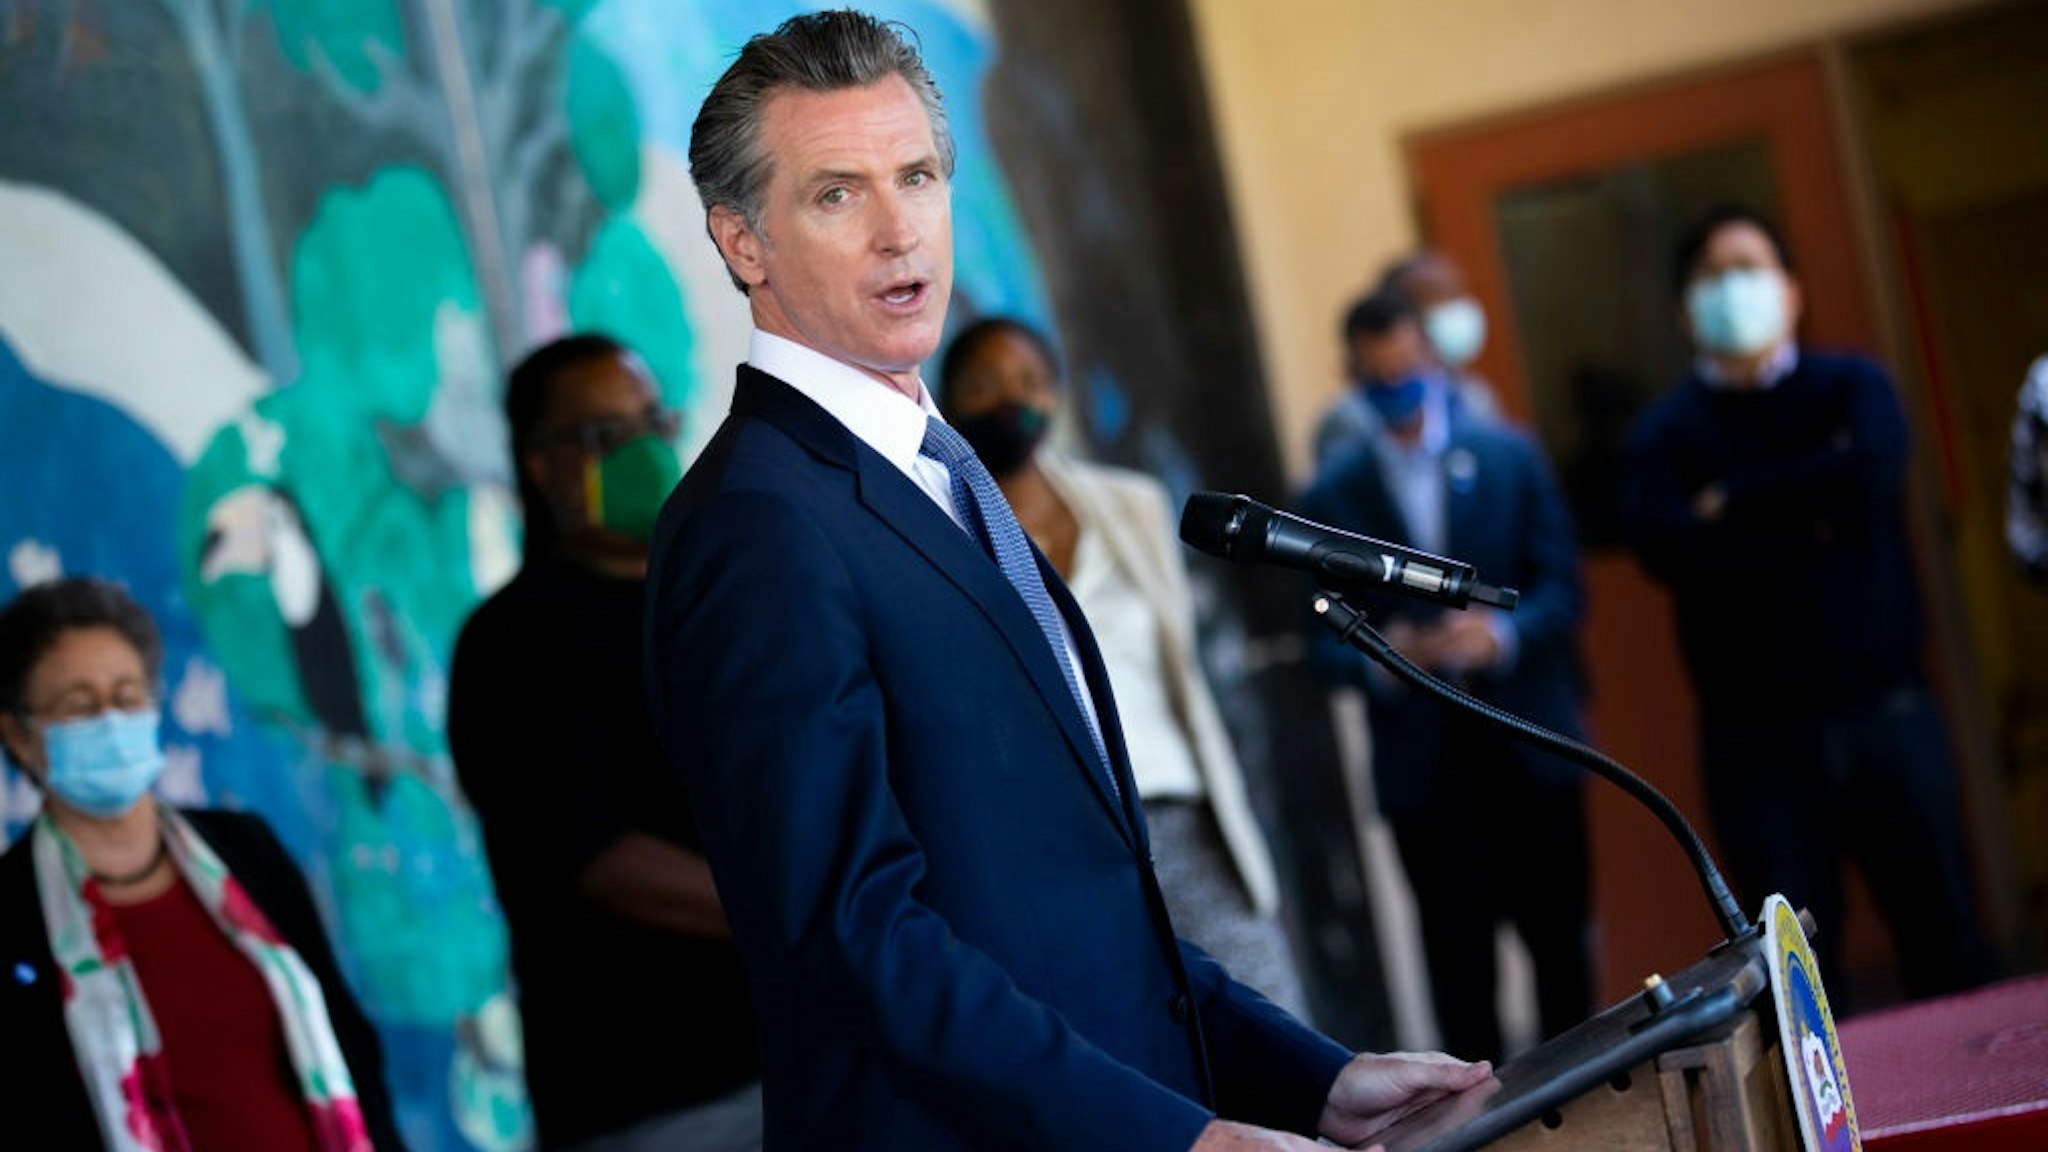 OAKLAND, CA - AUGUST 11: California Gov. Gavin Newsom during a news conference at Carl B. Munck Elementary School, Wednesday, Aug. 11, 2021, in Oakland, Calif.